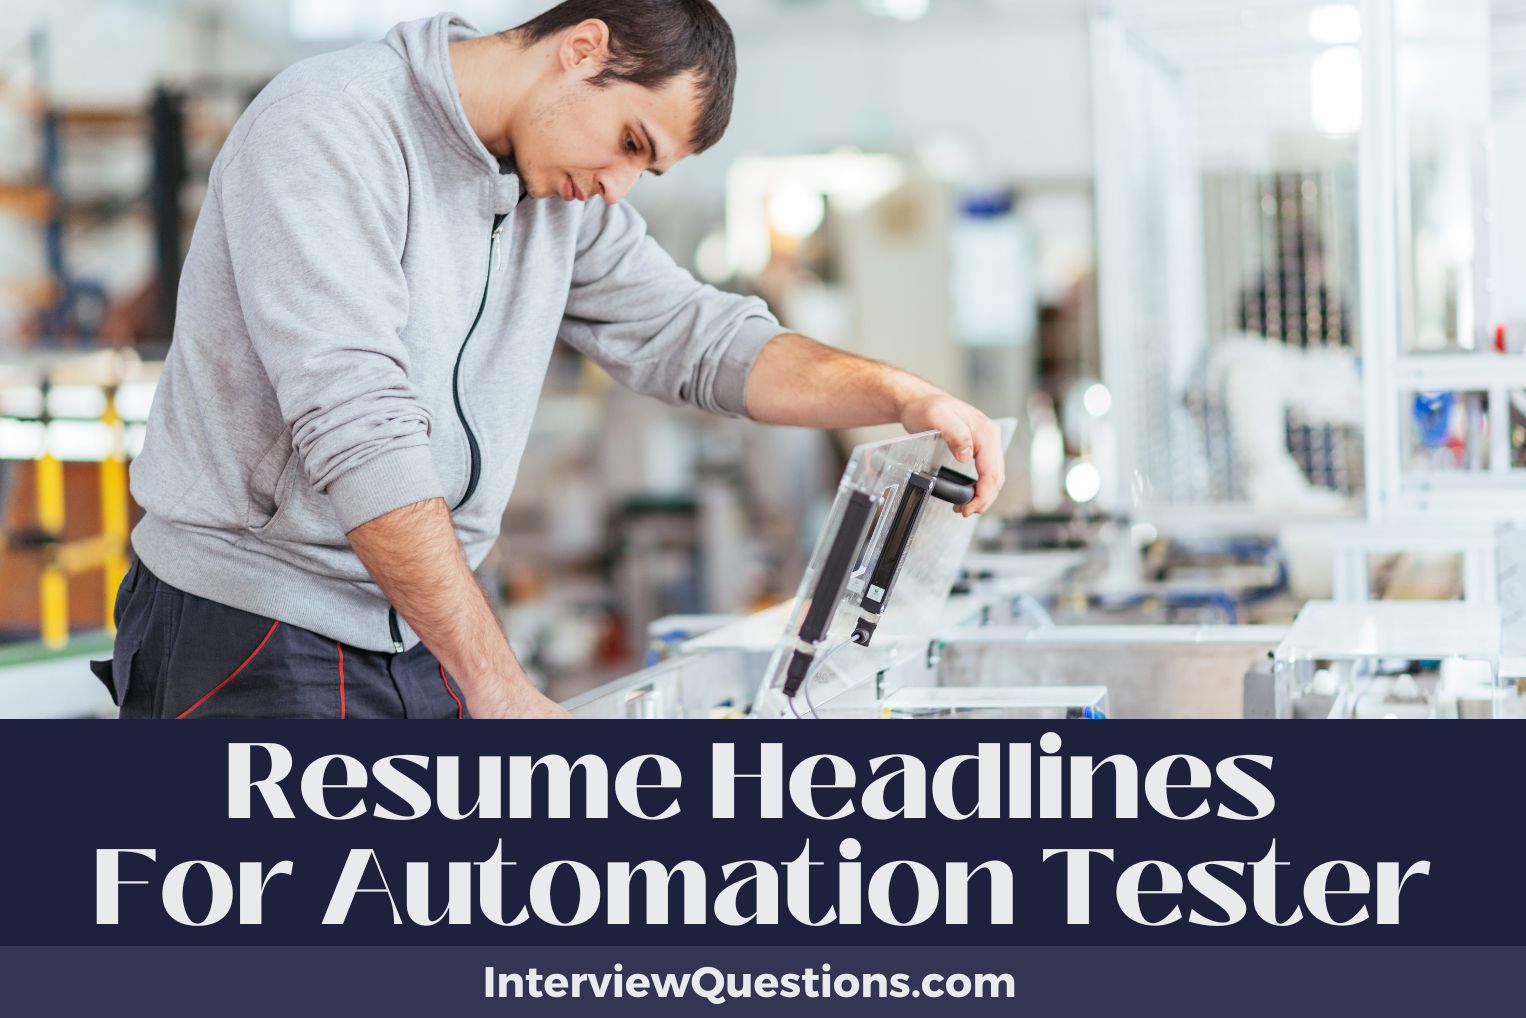 Resume Headlines For Automation Testers